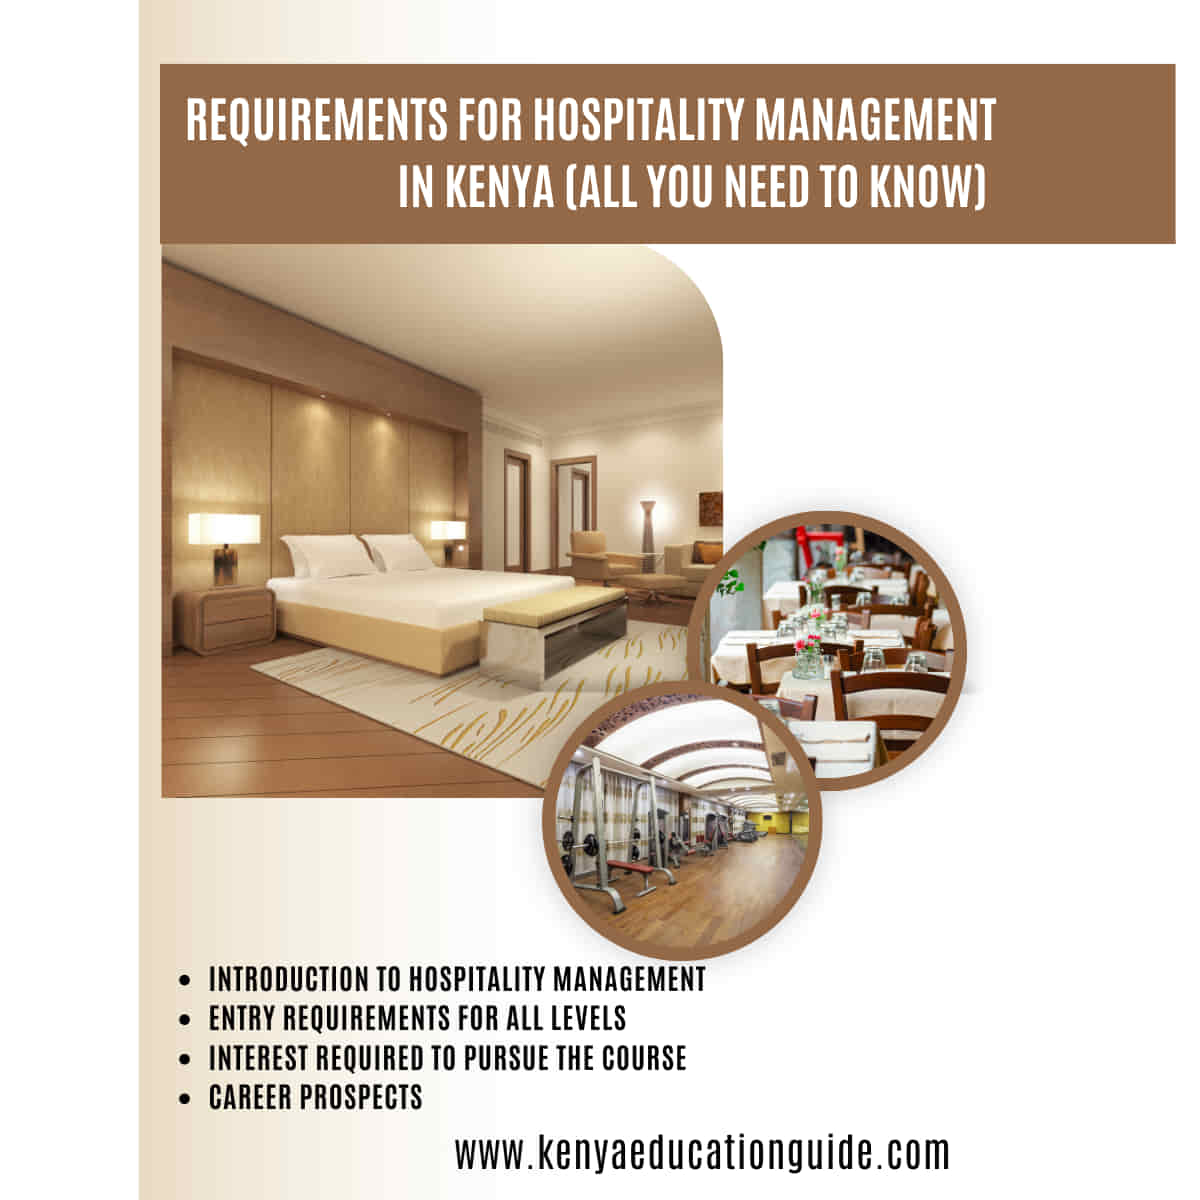 Requirements for hospitality management in Kenya